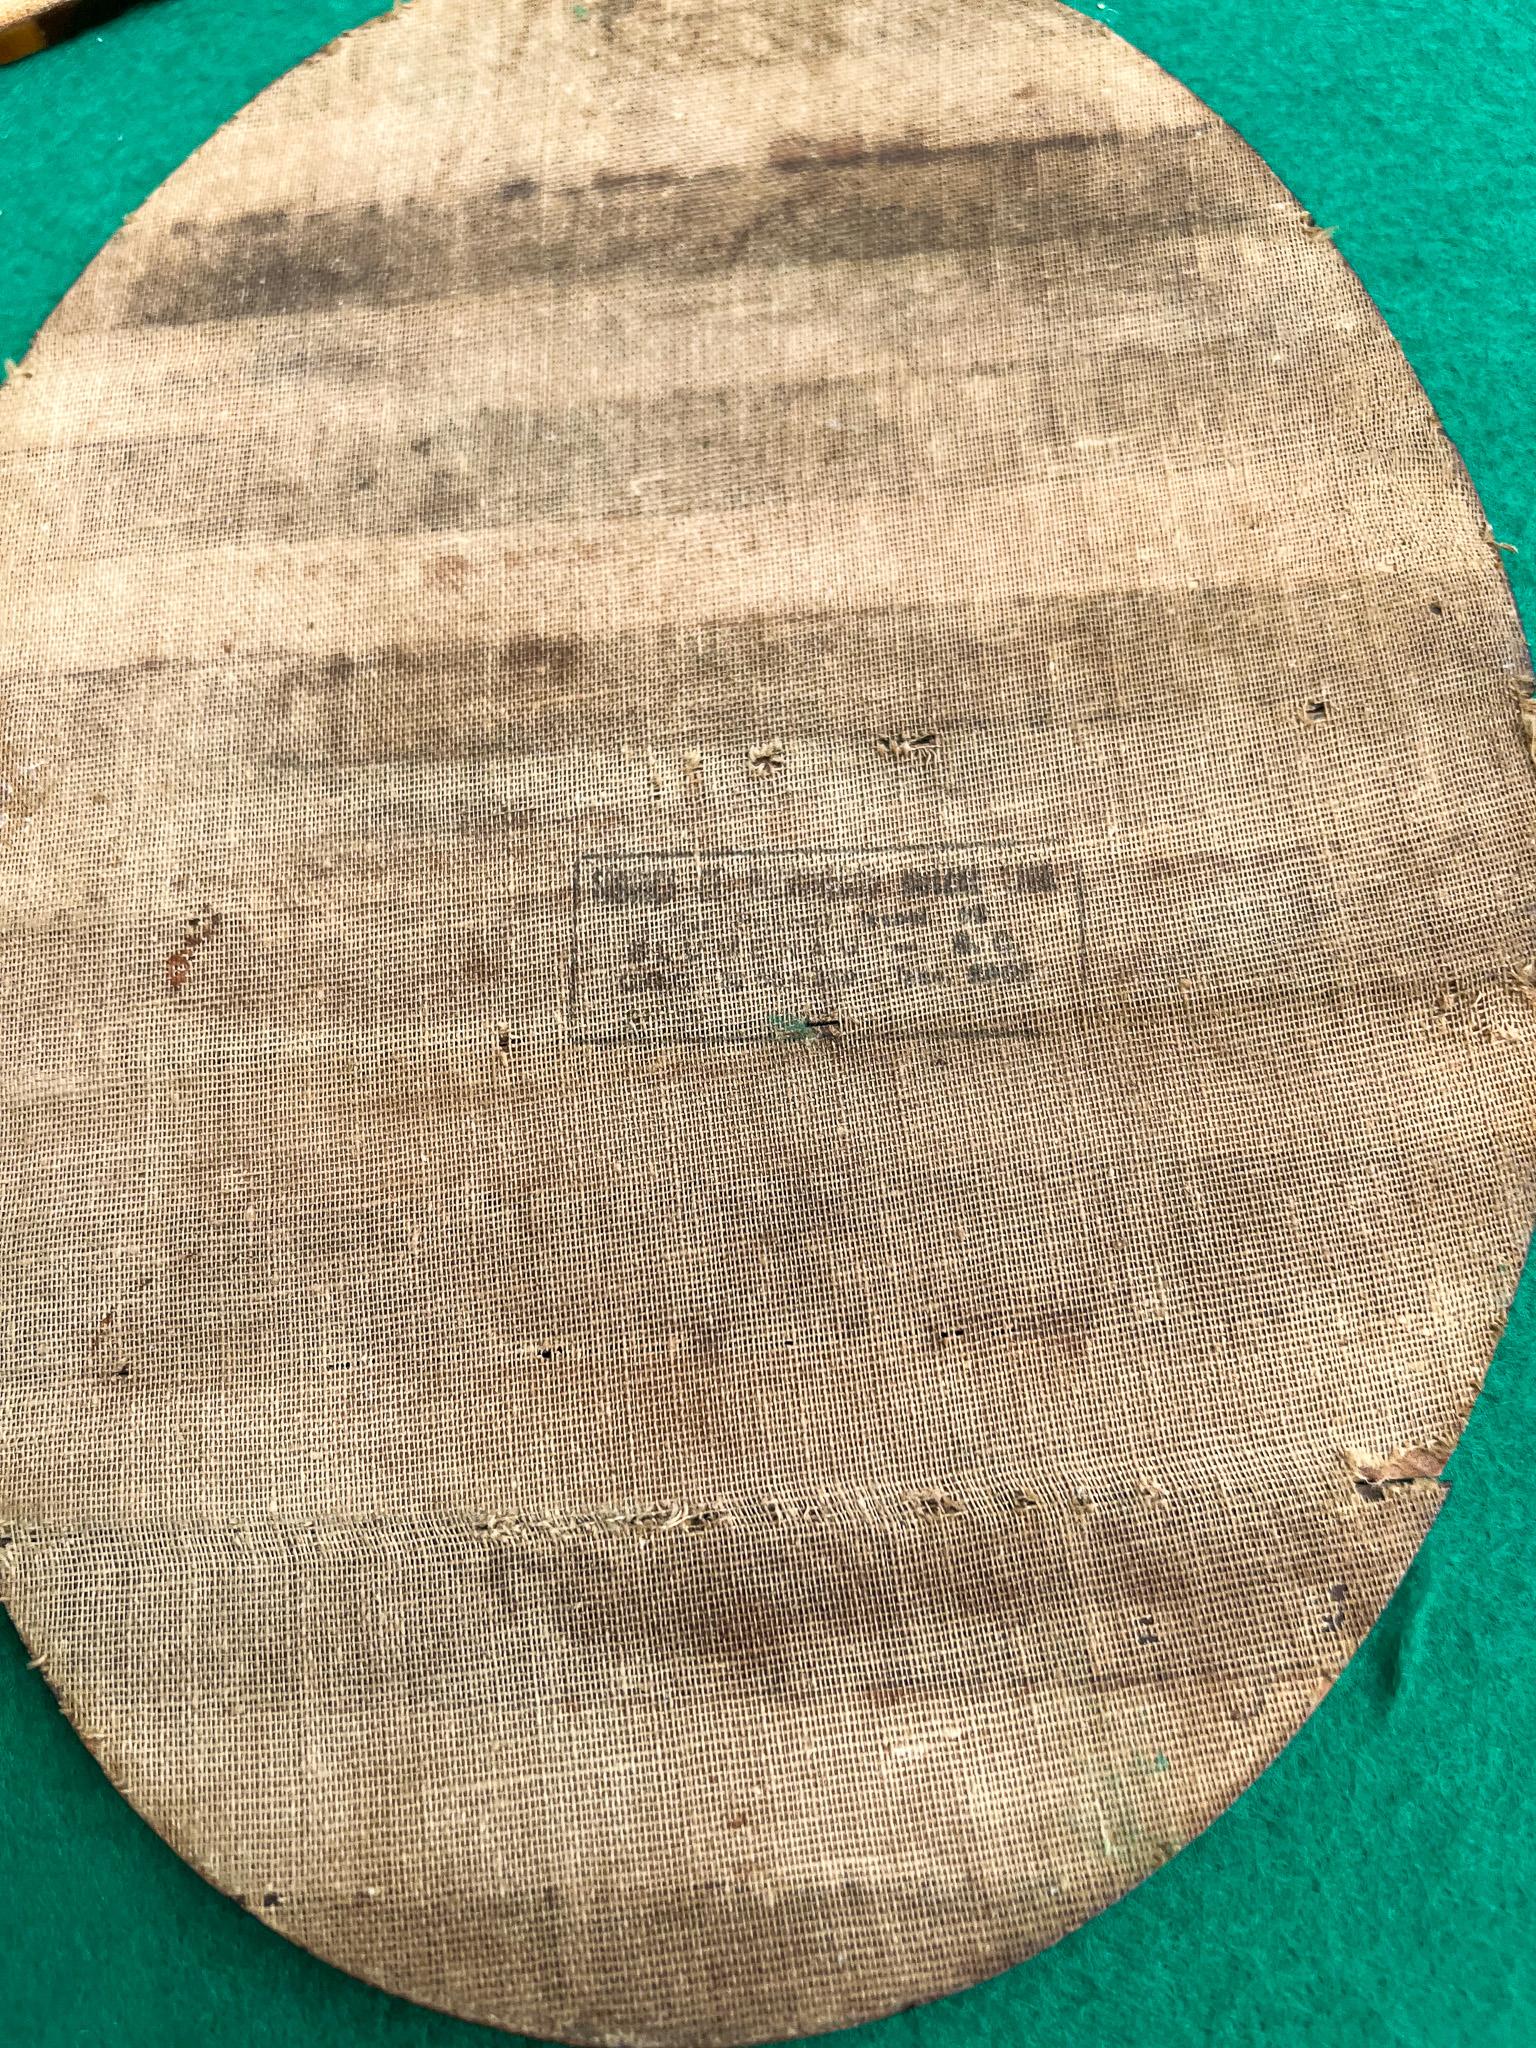 Woodwork Set of 4 Coasters in Hardwood, Unknown, 1960s